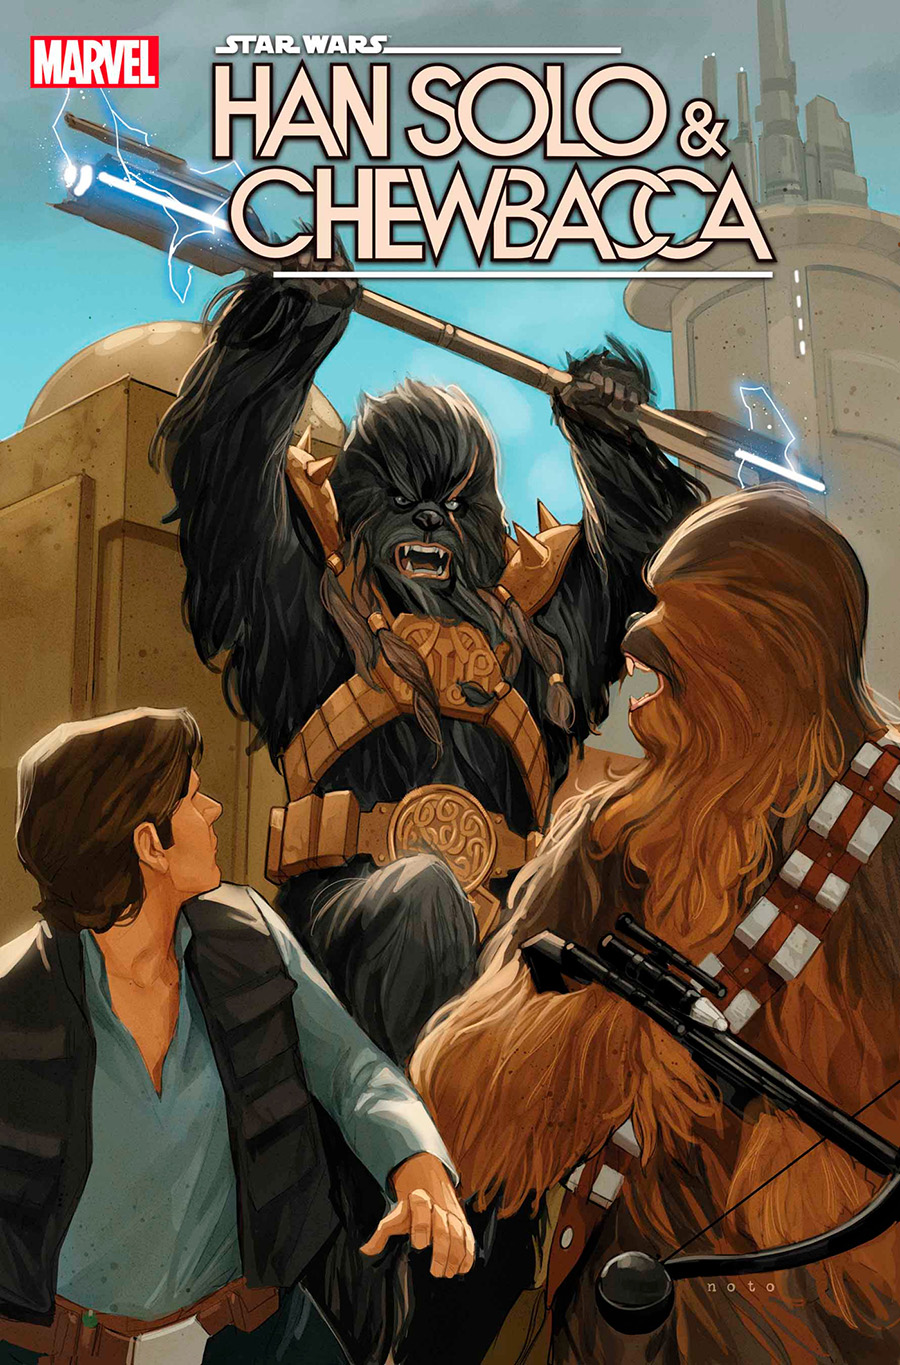 Star Wars Han Solo & Chewbacca #4 Cover A Regular Phil Noto Cover